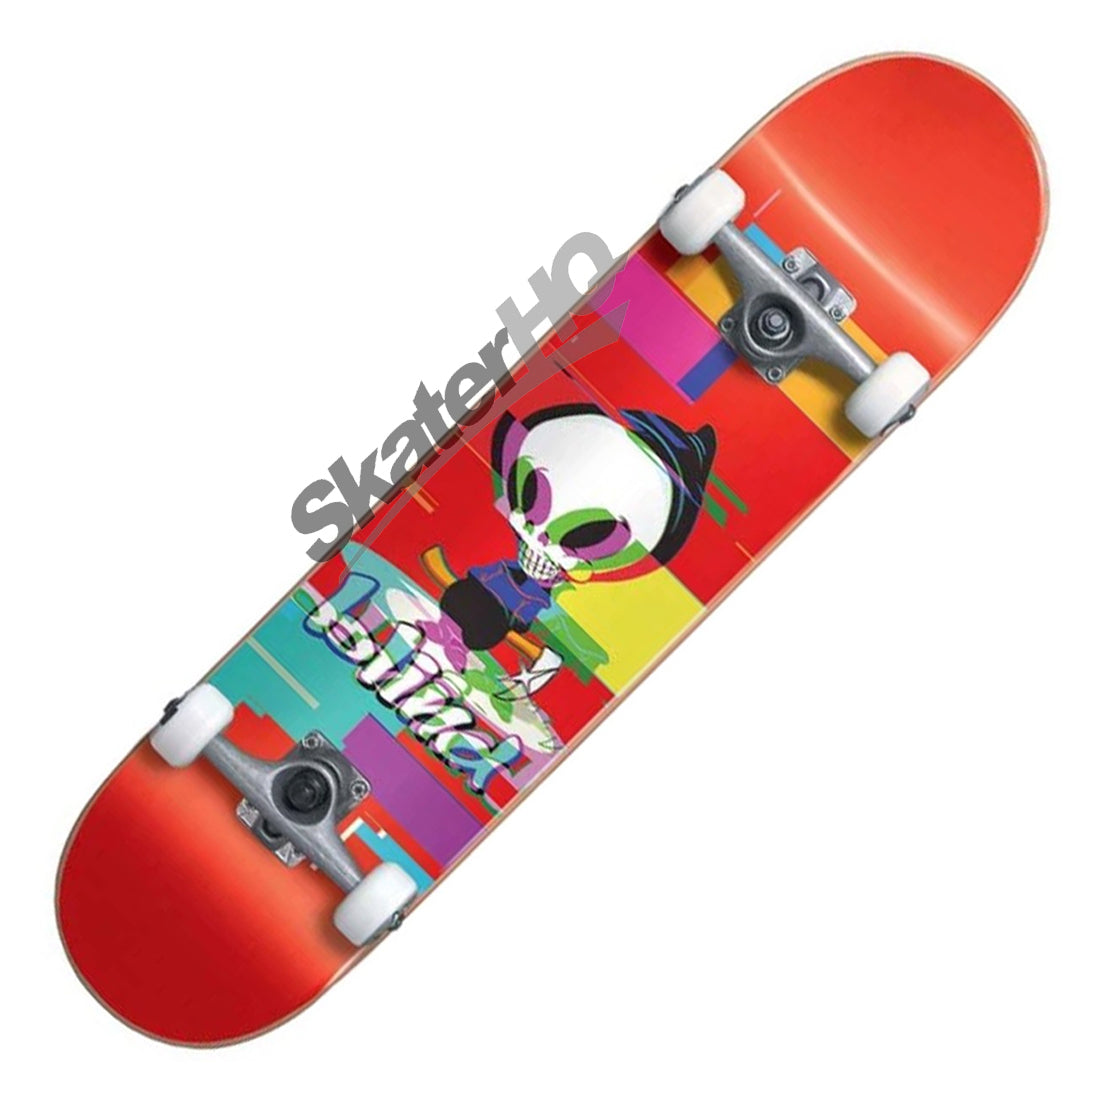 Blind Reaper Glitch 7.75 Complete - Bright Red Skateboard Completes Modern Street